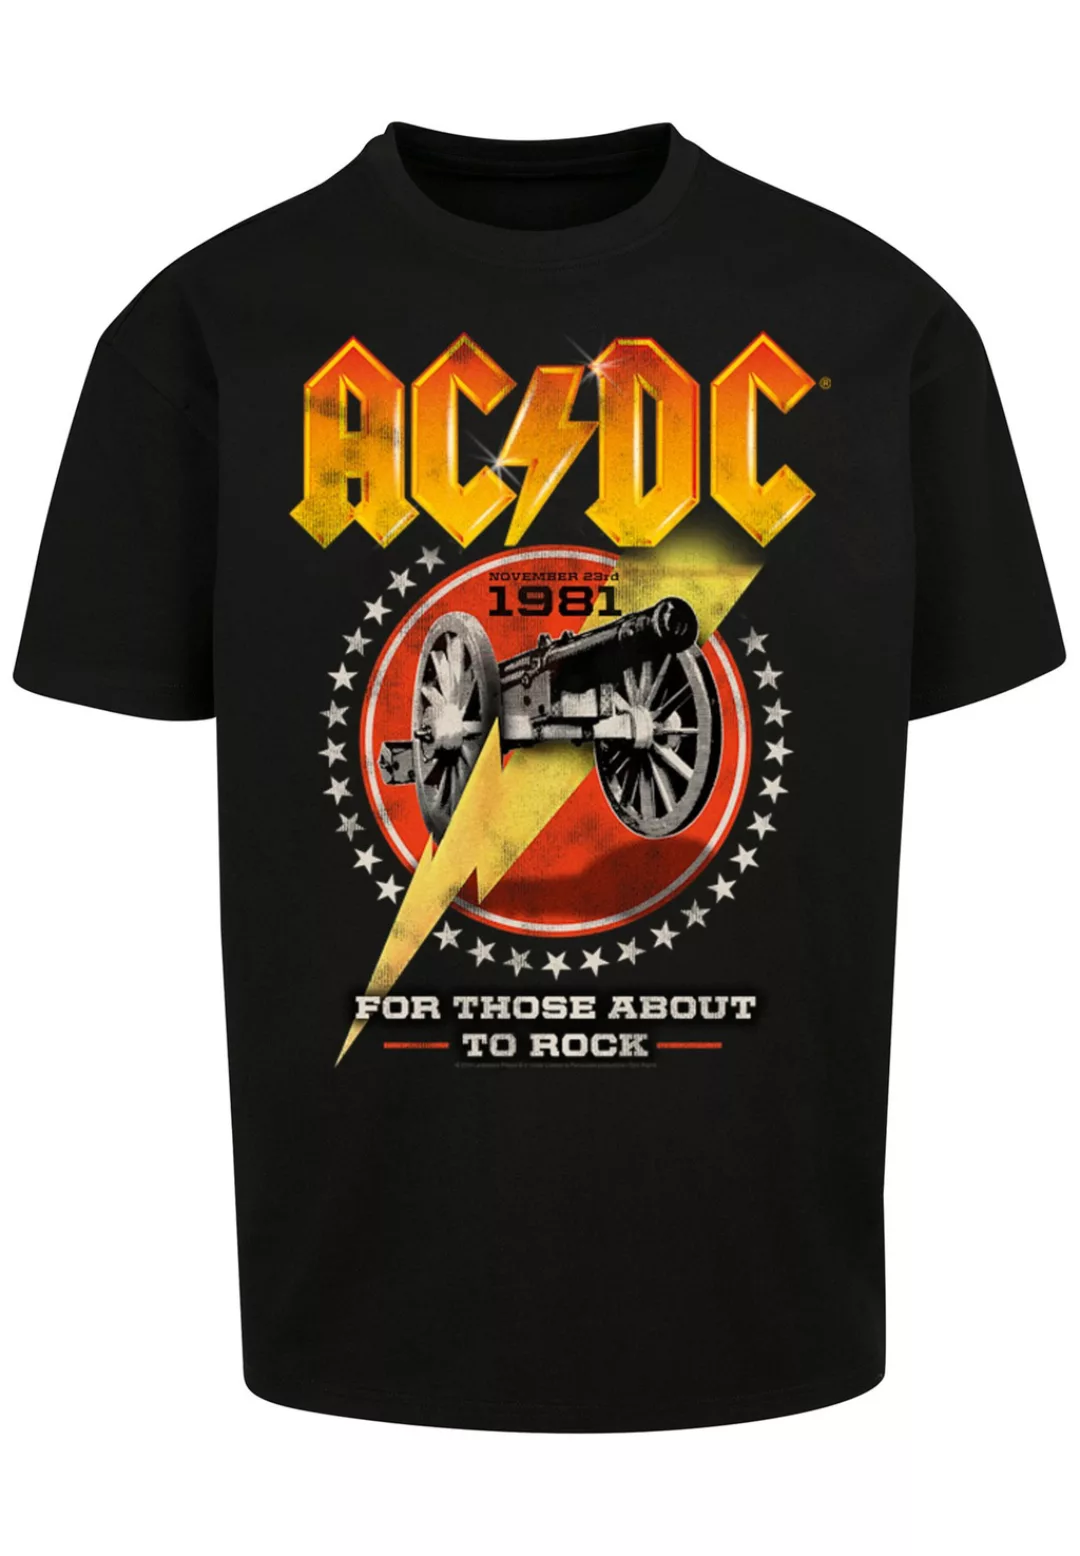 F4NT4STIC T-Shirt "ACDC Rock Band Shirt For Those About To Rock 1981" günstig online kaufen